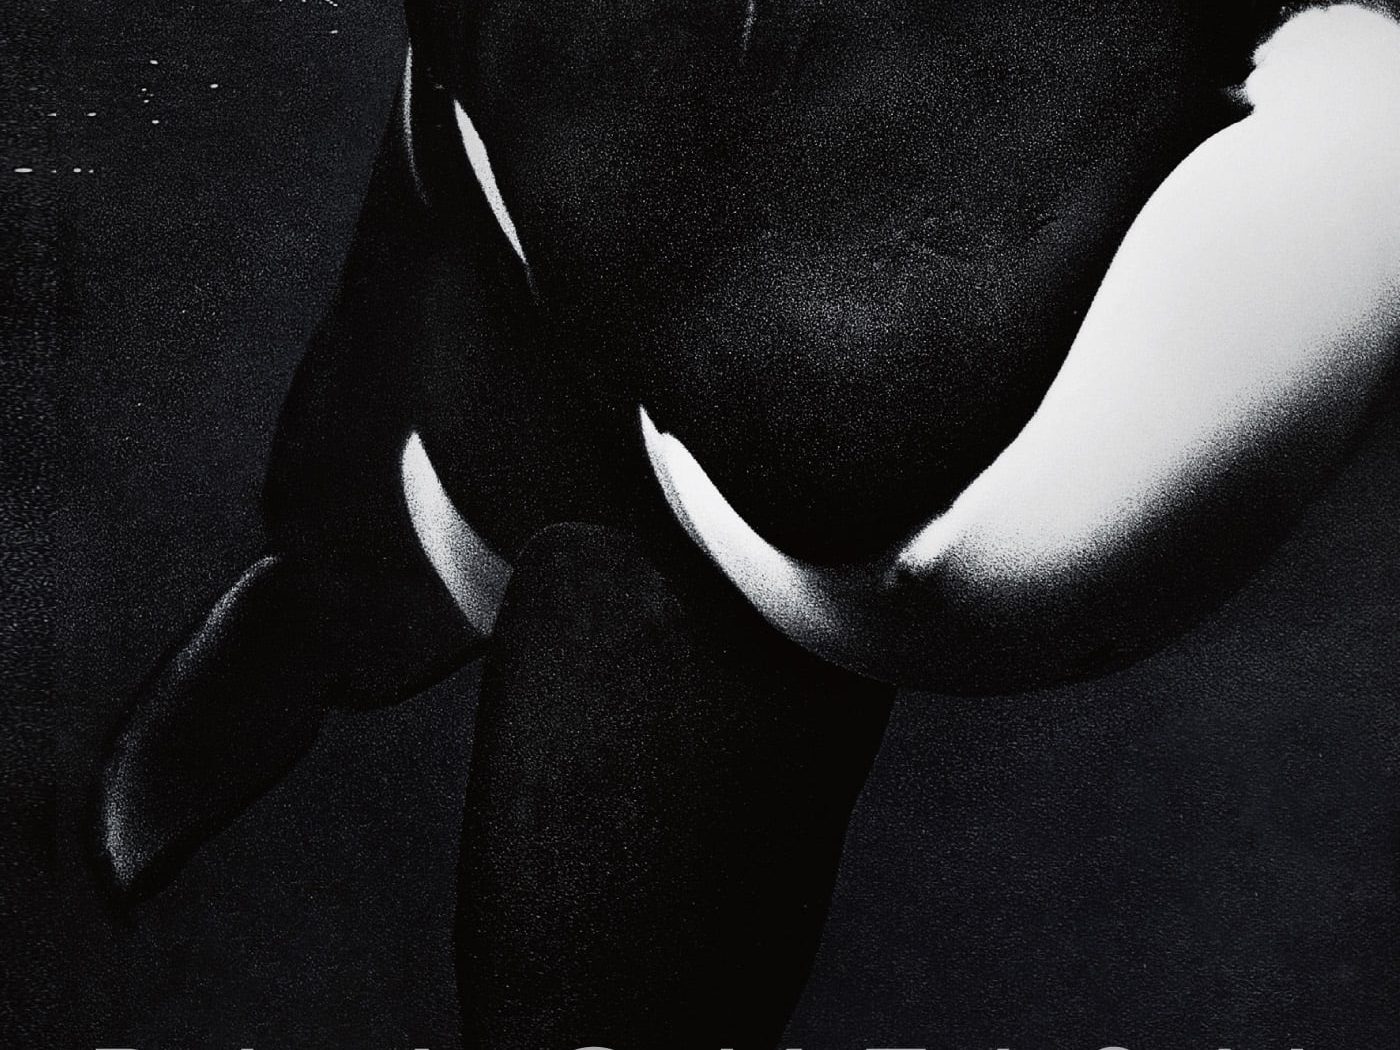 Poster for the movie "Blackfish"